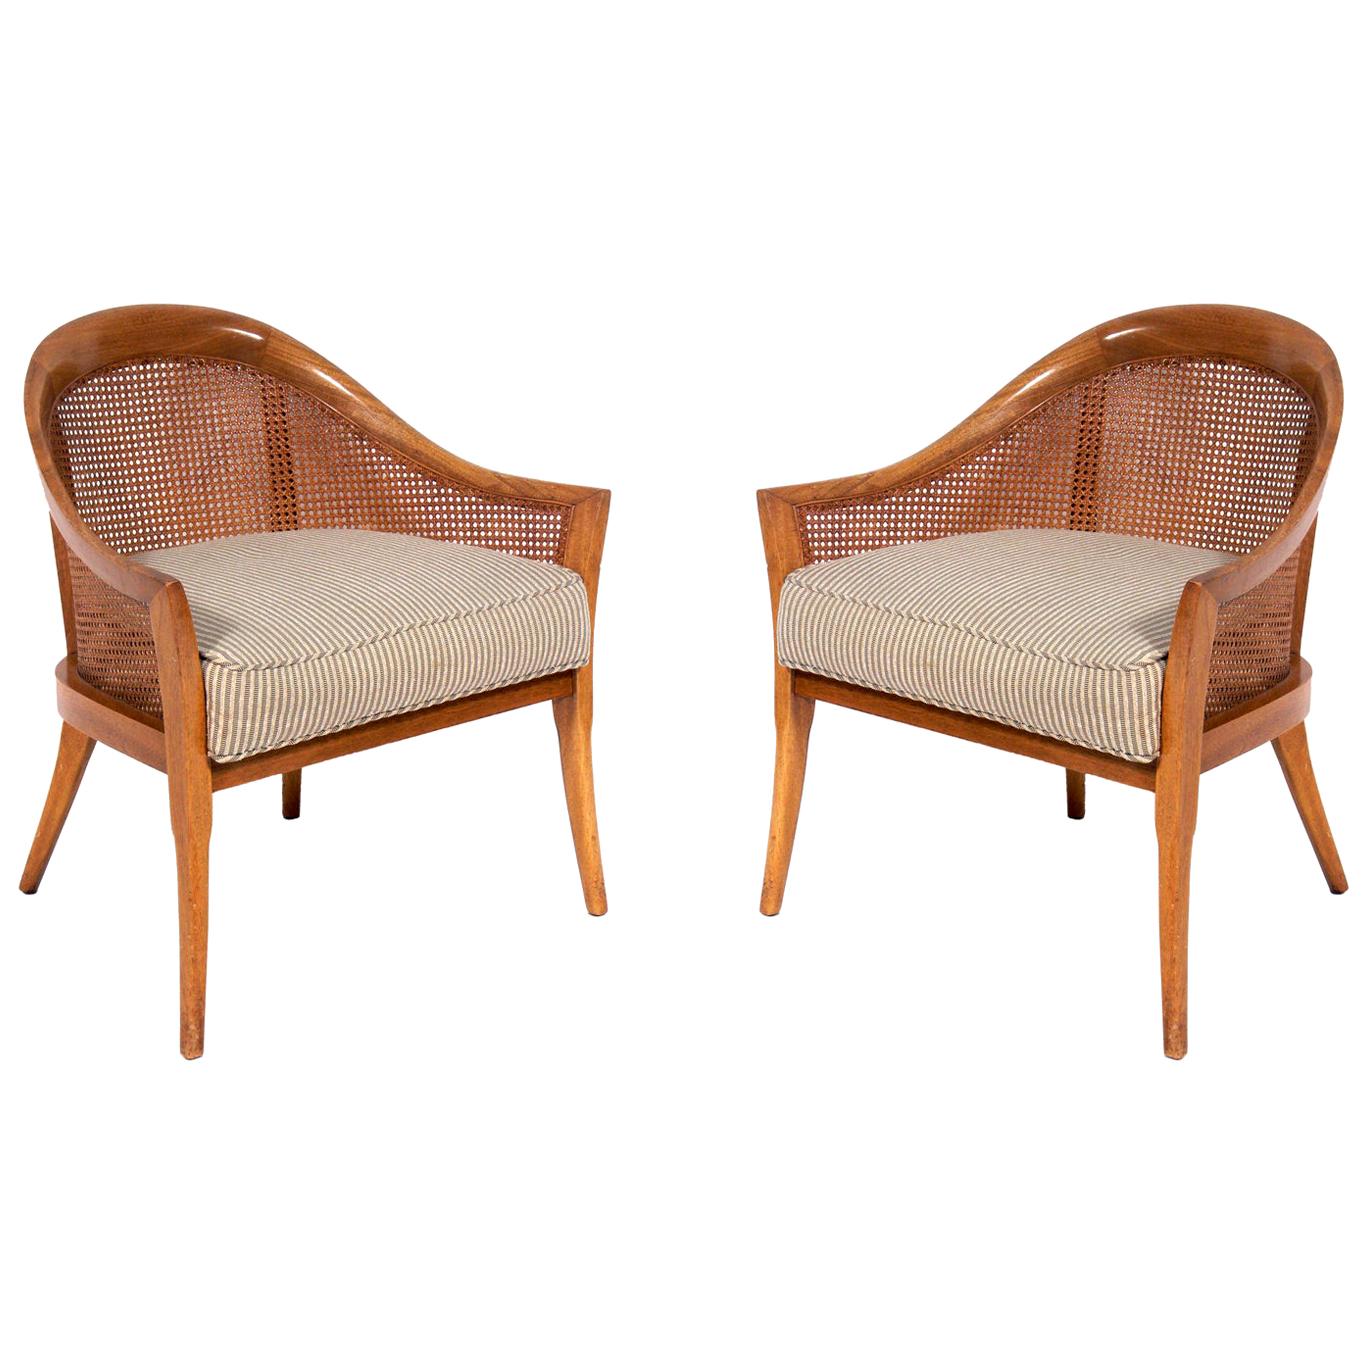 Pair of Curvaceous Harvey Probber Lounge Chairs